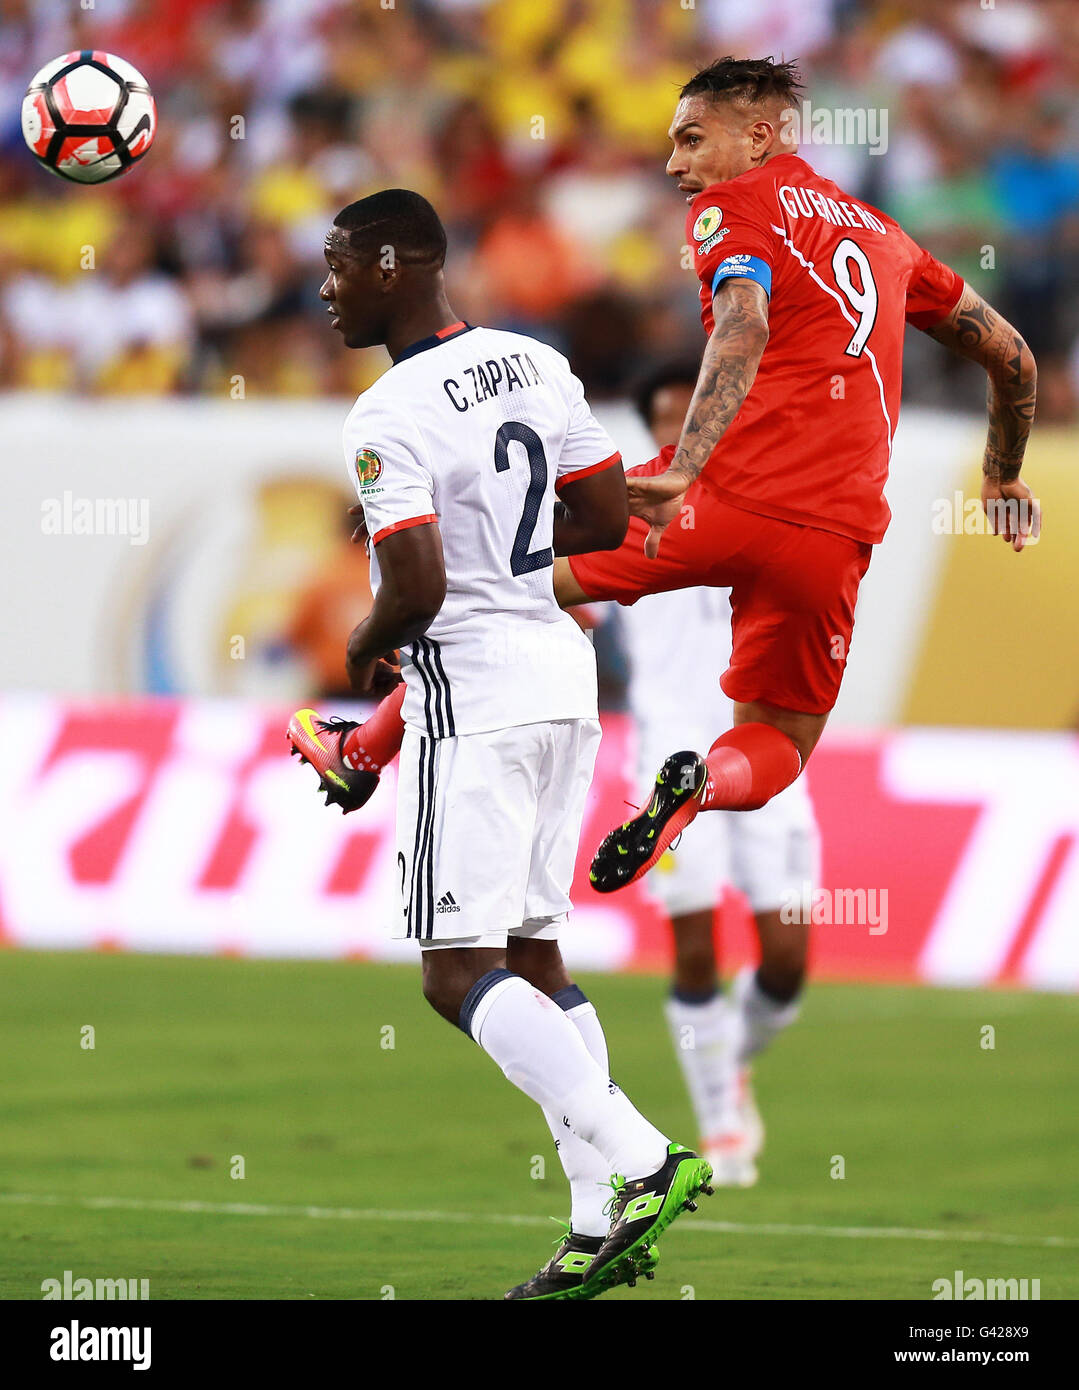 New Jersey, USA. 17th June, 2016. Jose Guerrero (R) of Peru vies with Cristian Zapata of Colombia during their quarterfinal match of 2016 Copa America soccer tournament at the Metlife Stadium in New Jersey, the United States, June 17, 2016. Colombia won in a penalty shootout with 4-2. Credit:  Qin Lang/Xinhua/Alamy Live News Stock Photo